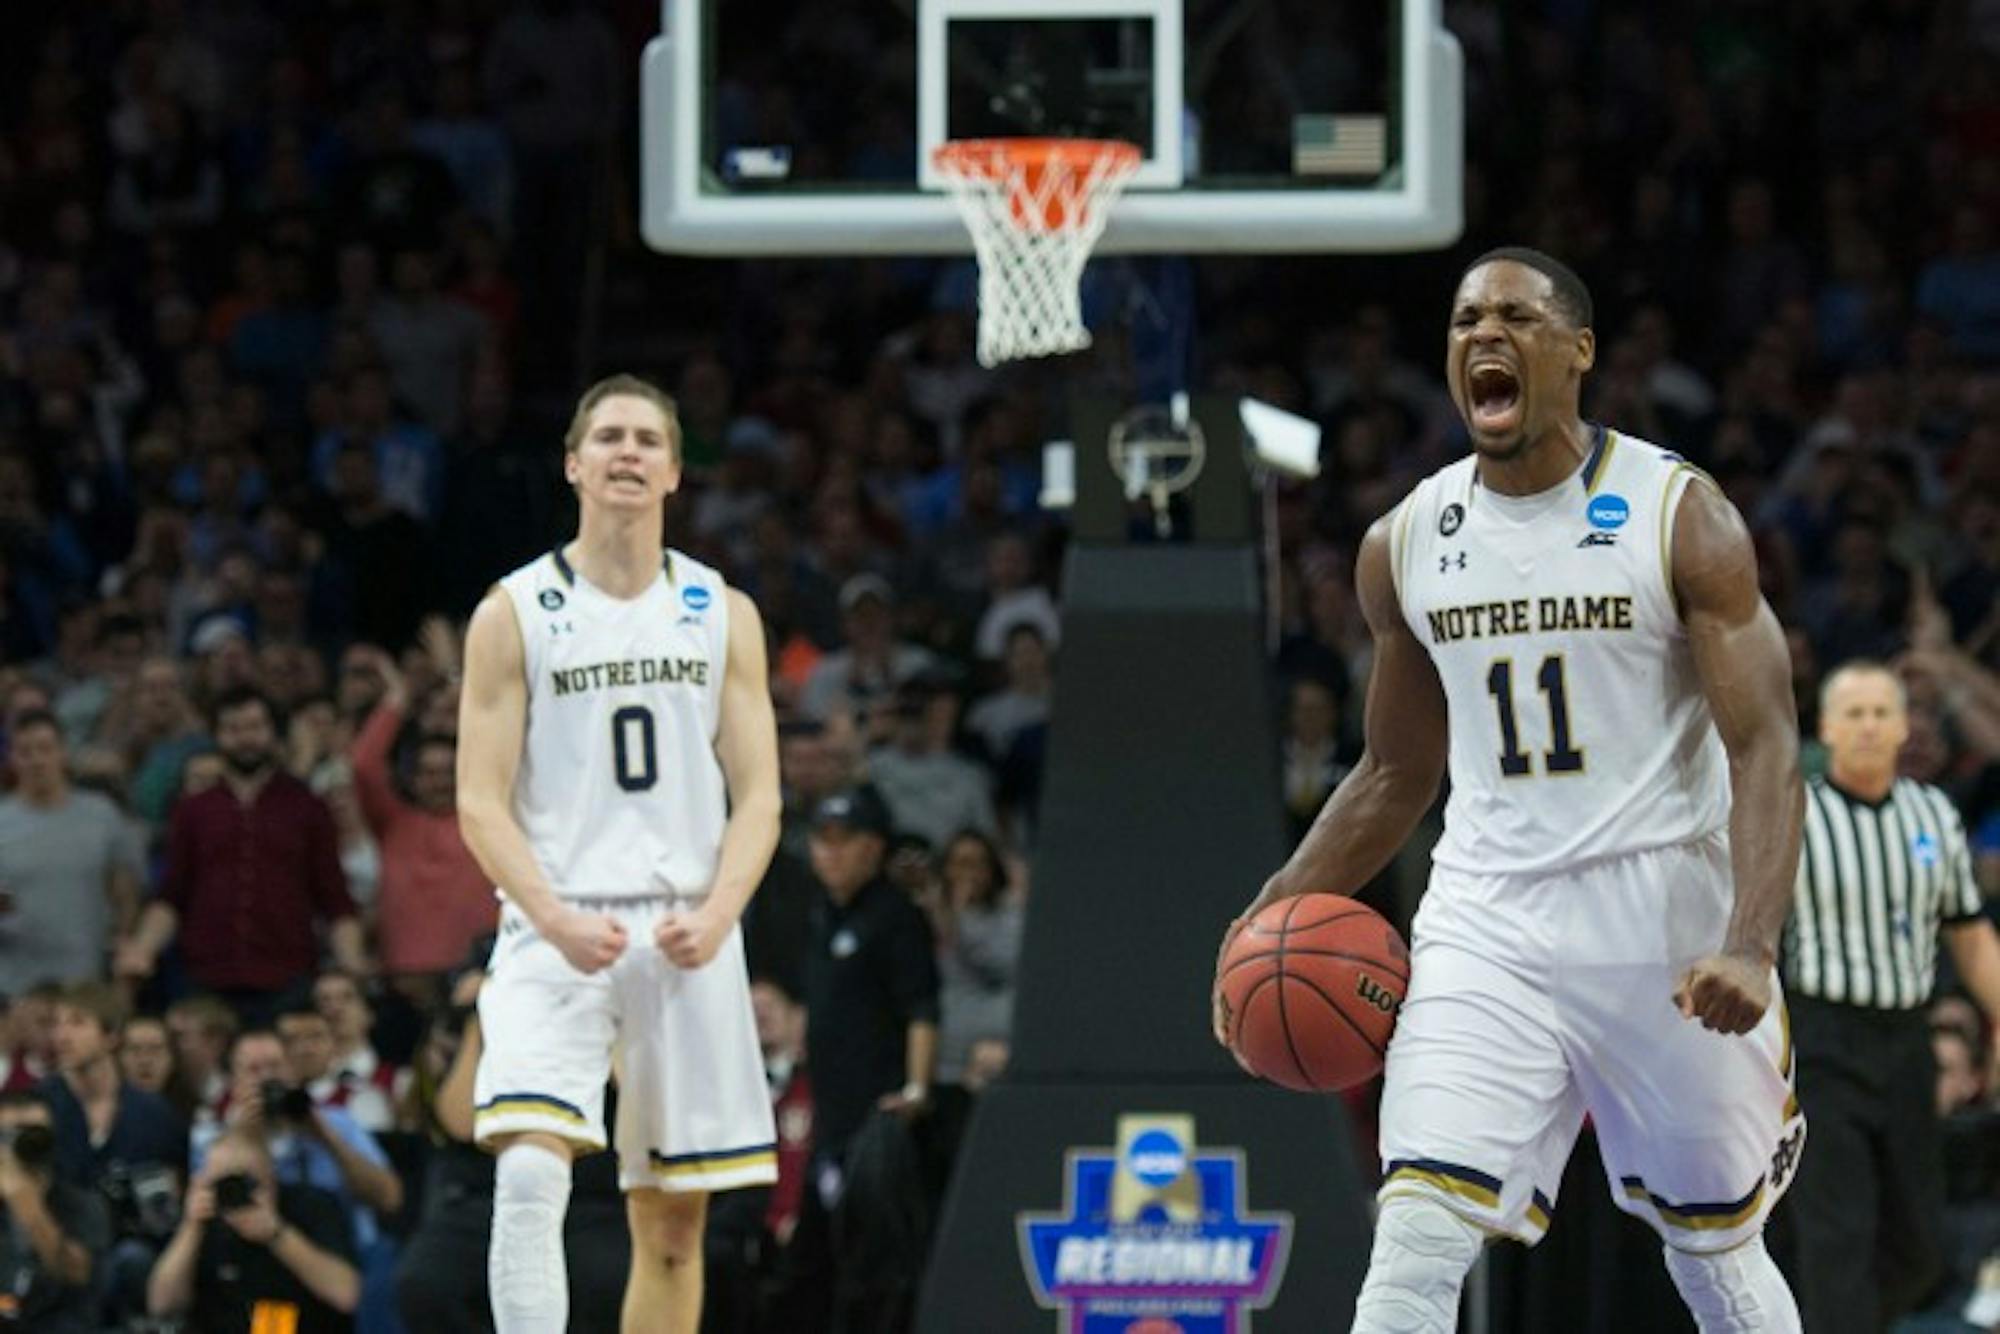 Junior forward Demetrius Jackson, right, celebrates near the conclusion of Notre Dame’s 61-56 NCAA tournament win over Wisconsin on Friday at Wells Fargo Center in Philadelphia.